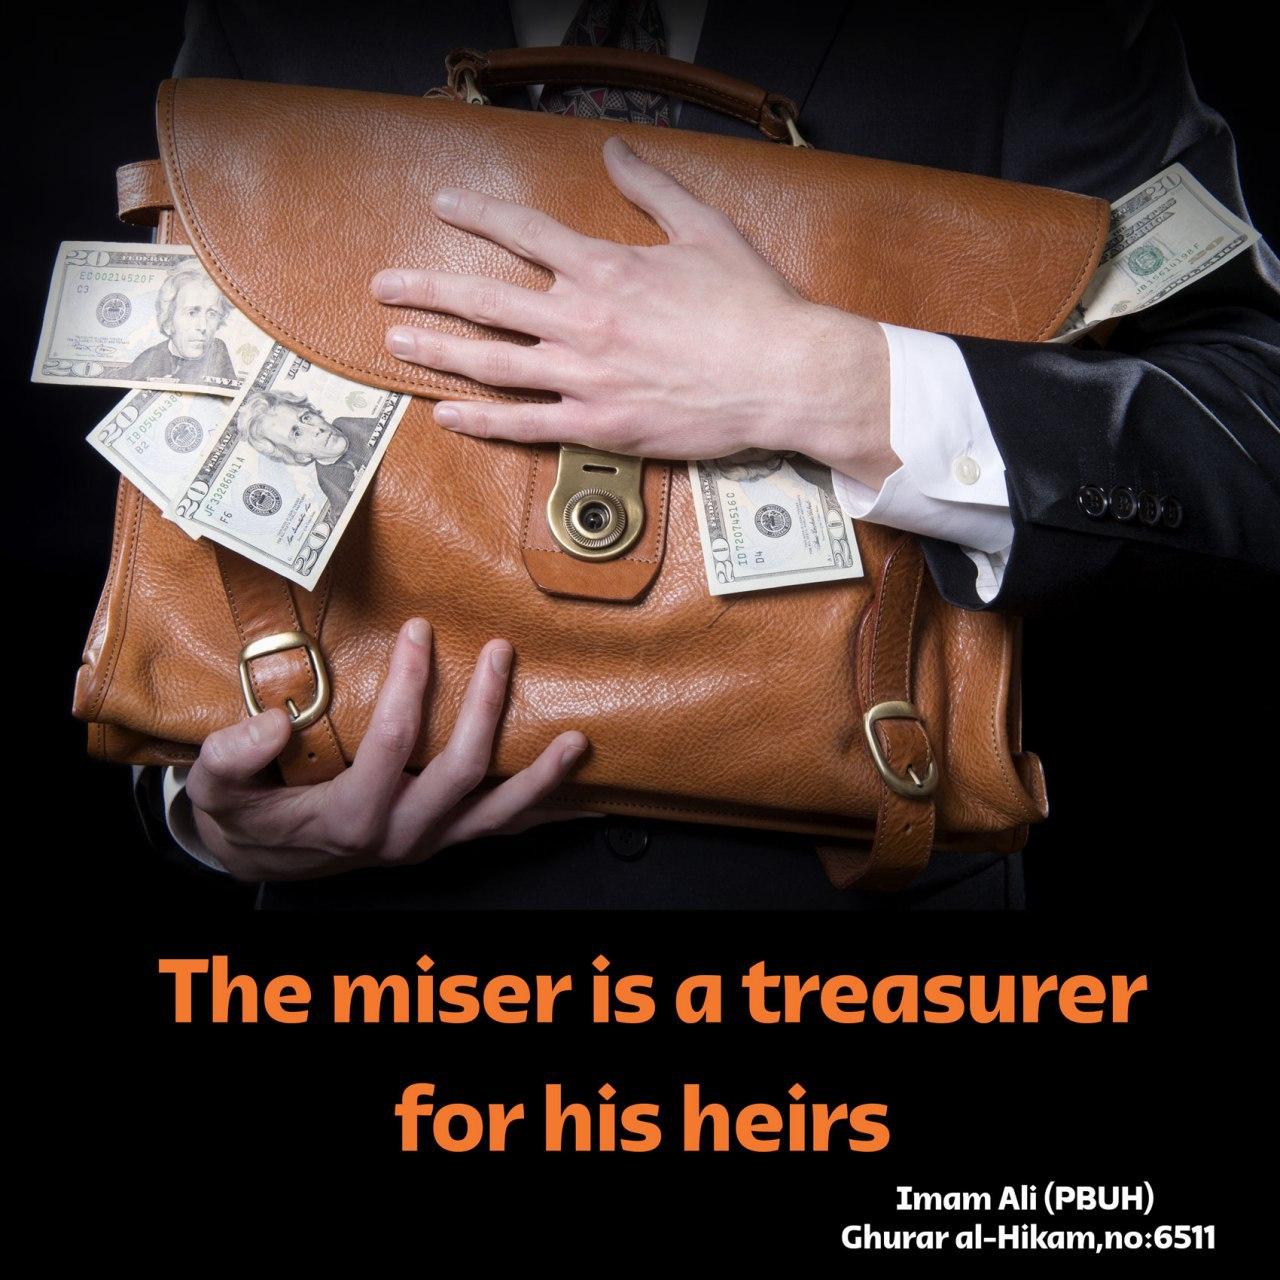 The miser is a treasurer for his heirs